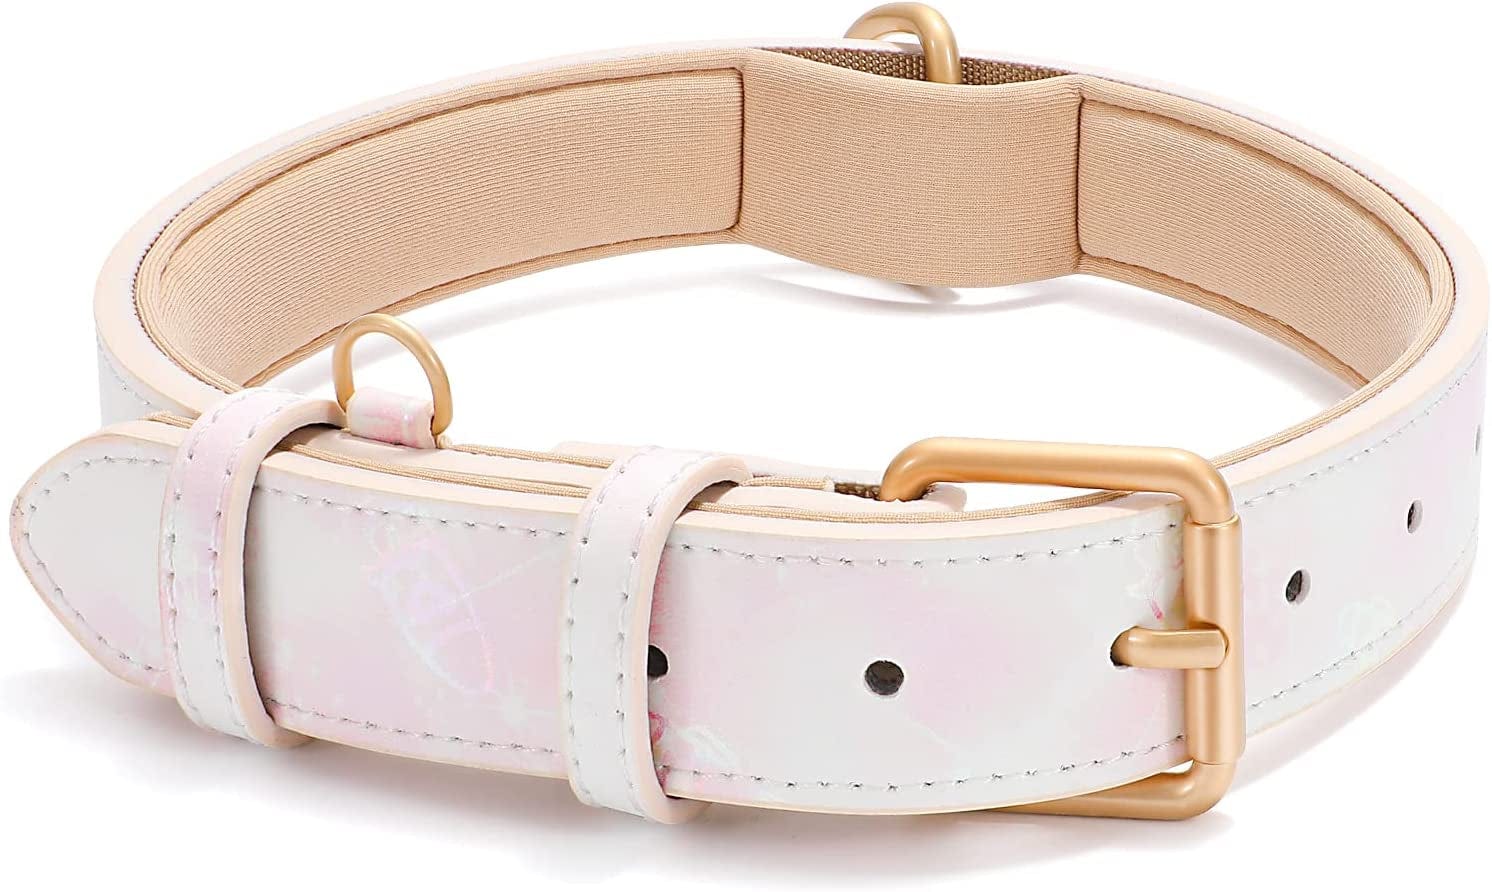 WHIPPY Airtag Leather Dog Collar GPS Tracker Air Tag Puppy Collar Adjustable Soft Leather Padded Dog Collar with Airtag Holder Case for Small Medium Large Dog Pet Backpack,Pink,M Electronics > GPS Accessories > GPS Cases WHIPPY A-pink sky S:Neck 13"-17",Width 0.78" 